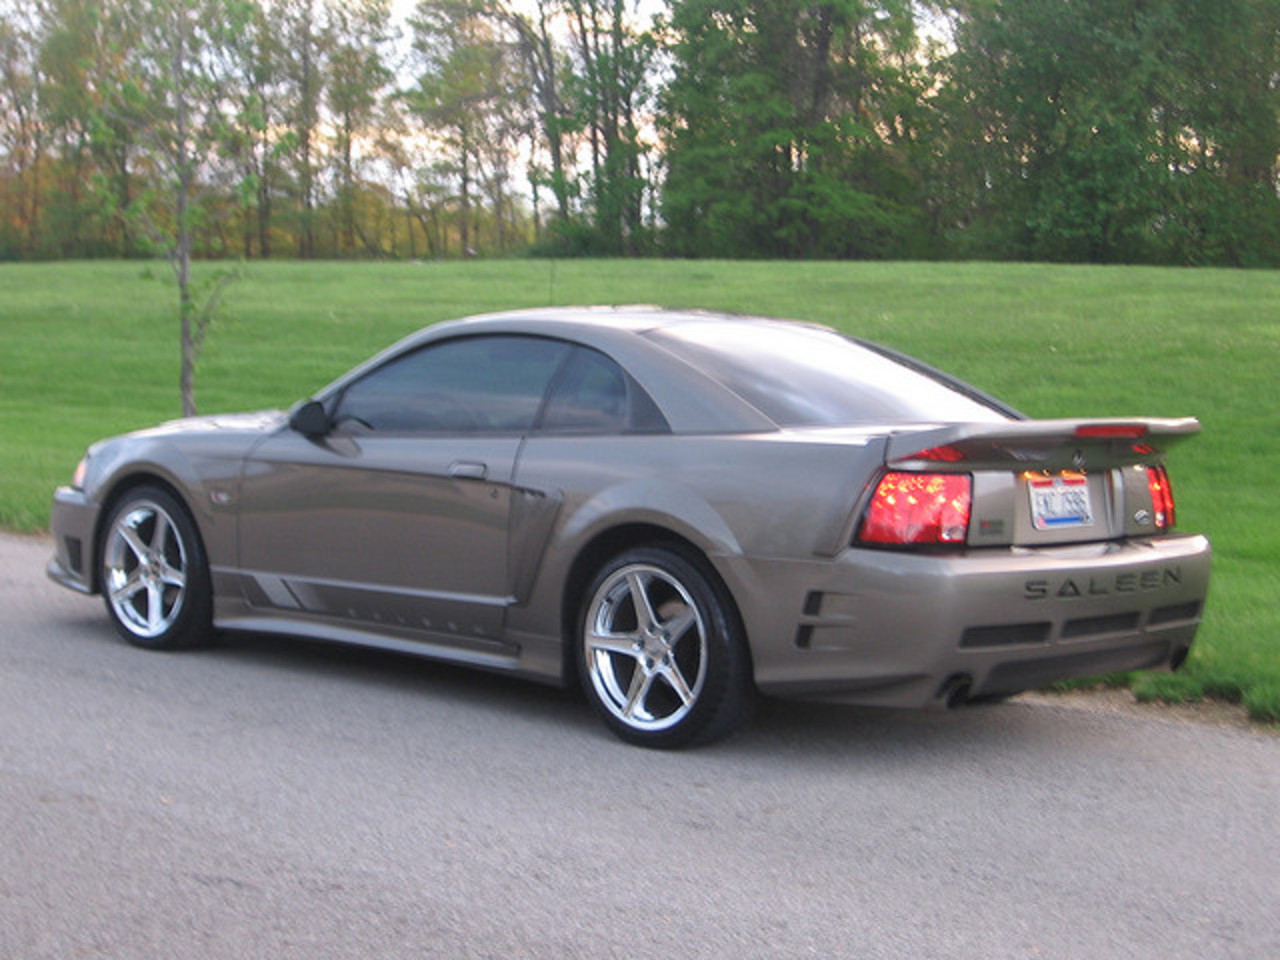 2002 Saleen S281 SC Pic #7 | Flickr - Photo Sharing!